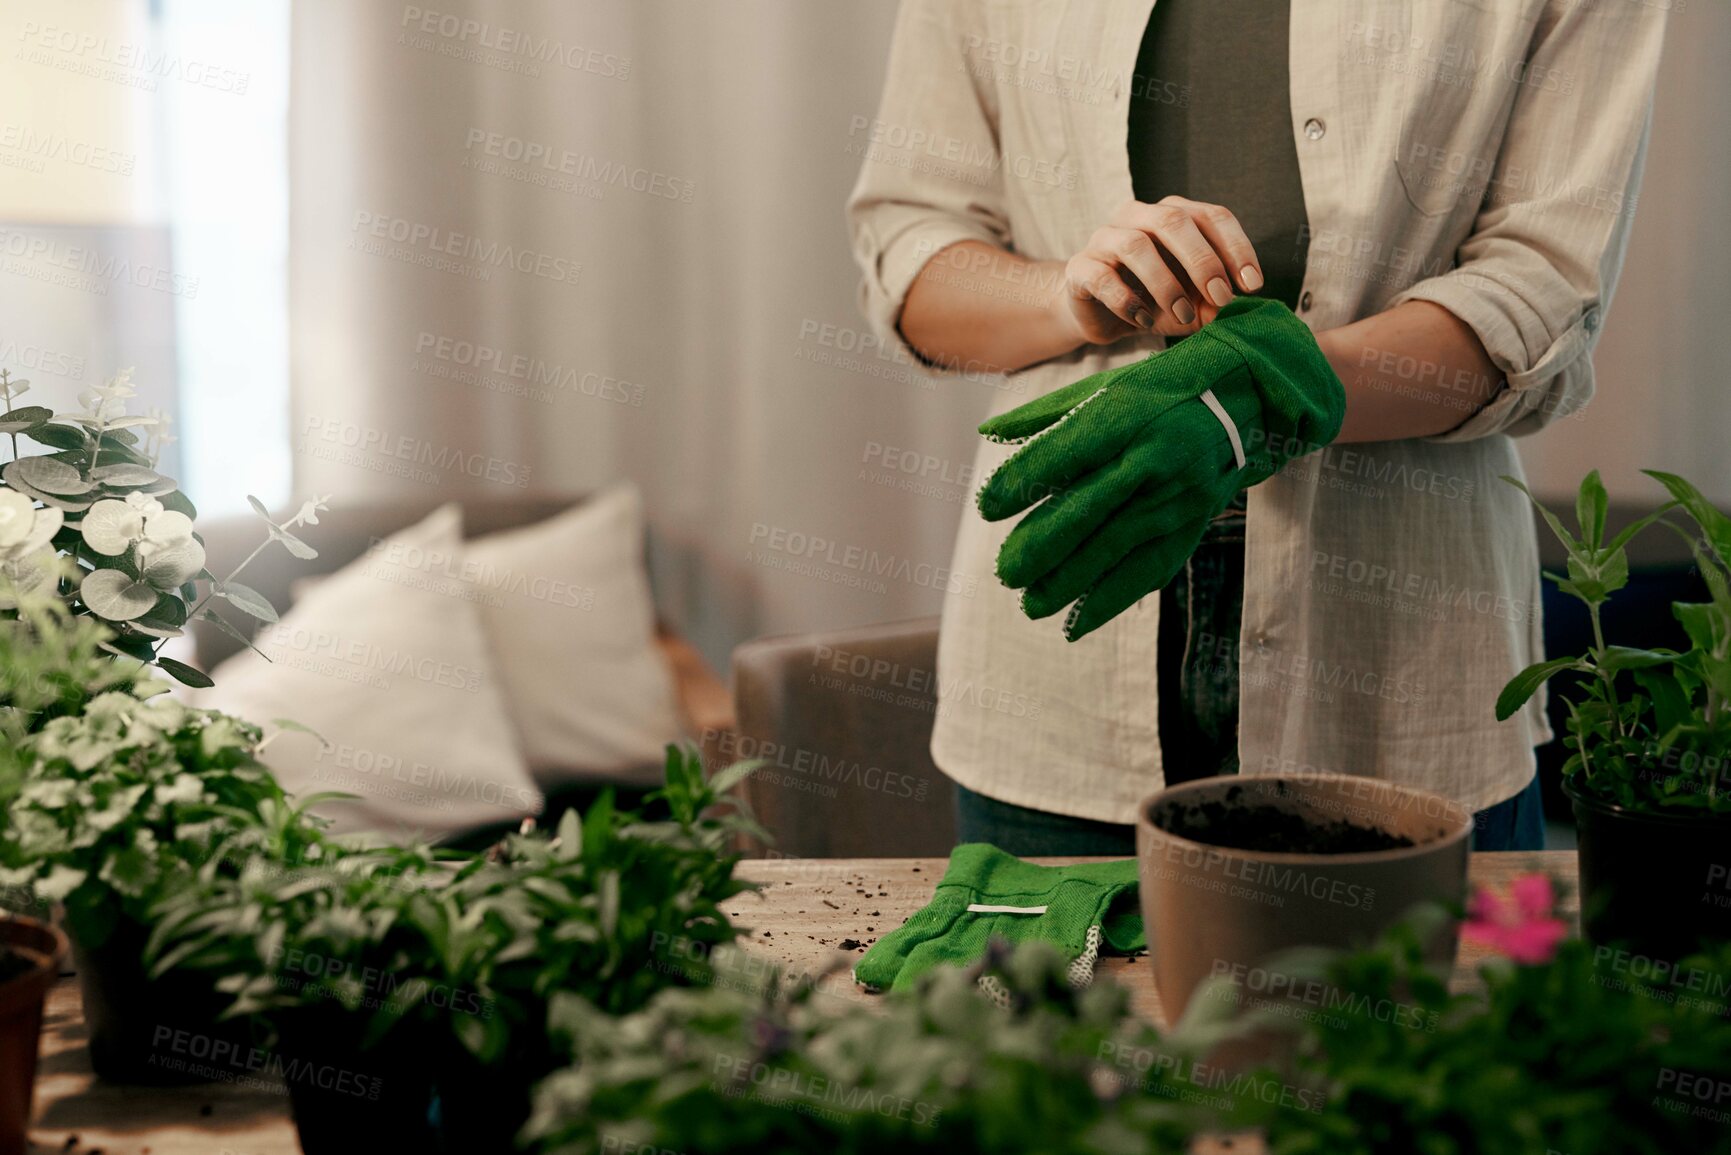 Buy stock photo Cropped shot of an unrecognizable florist potting plants inside her store